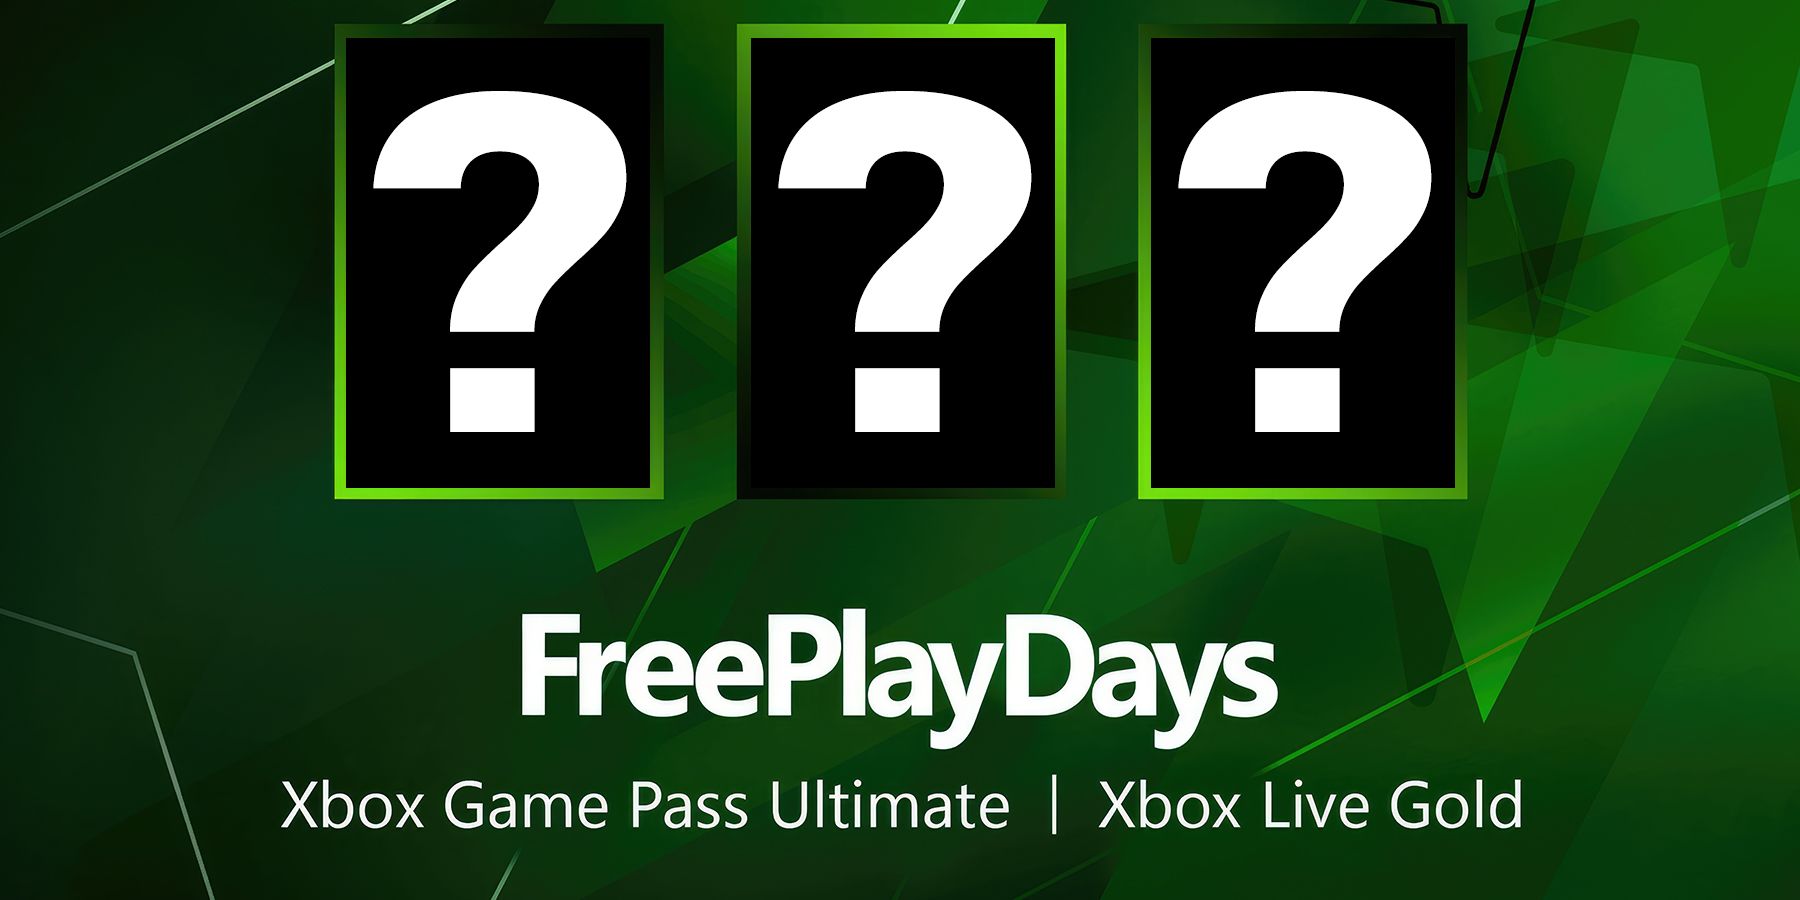 Xbox Game Pass Ultimate Subscribers Have 3 Free Games to Try This Weekend